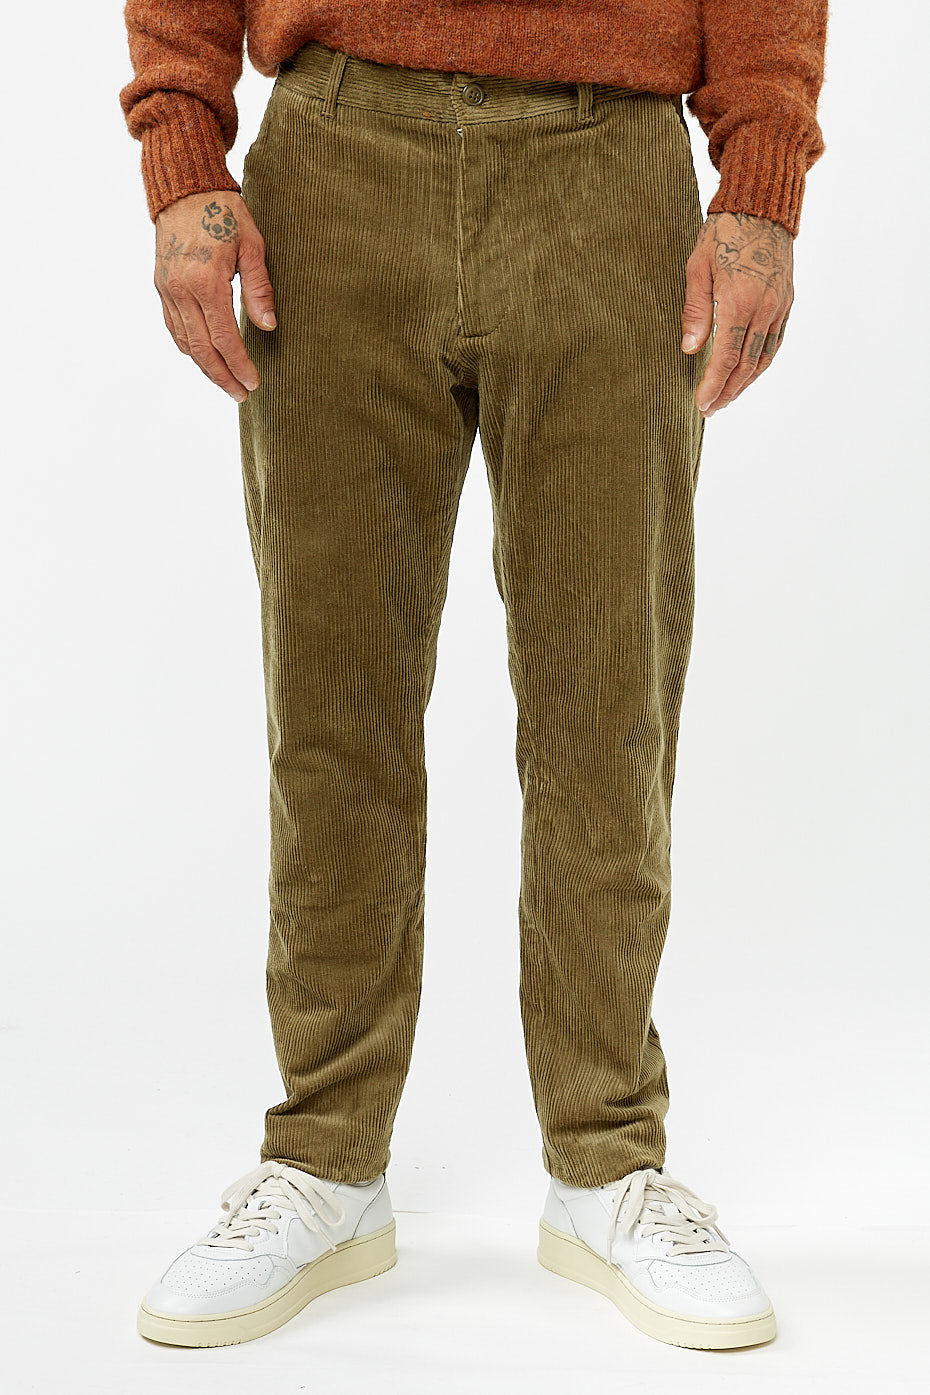 Covert Green Andy X Trousers